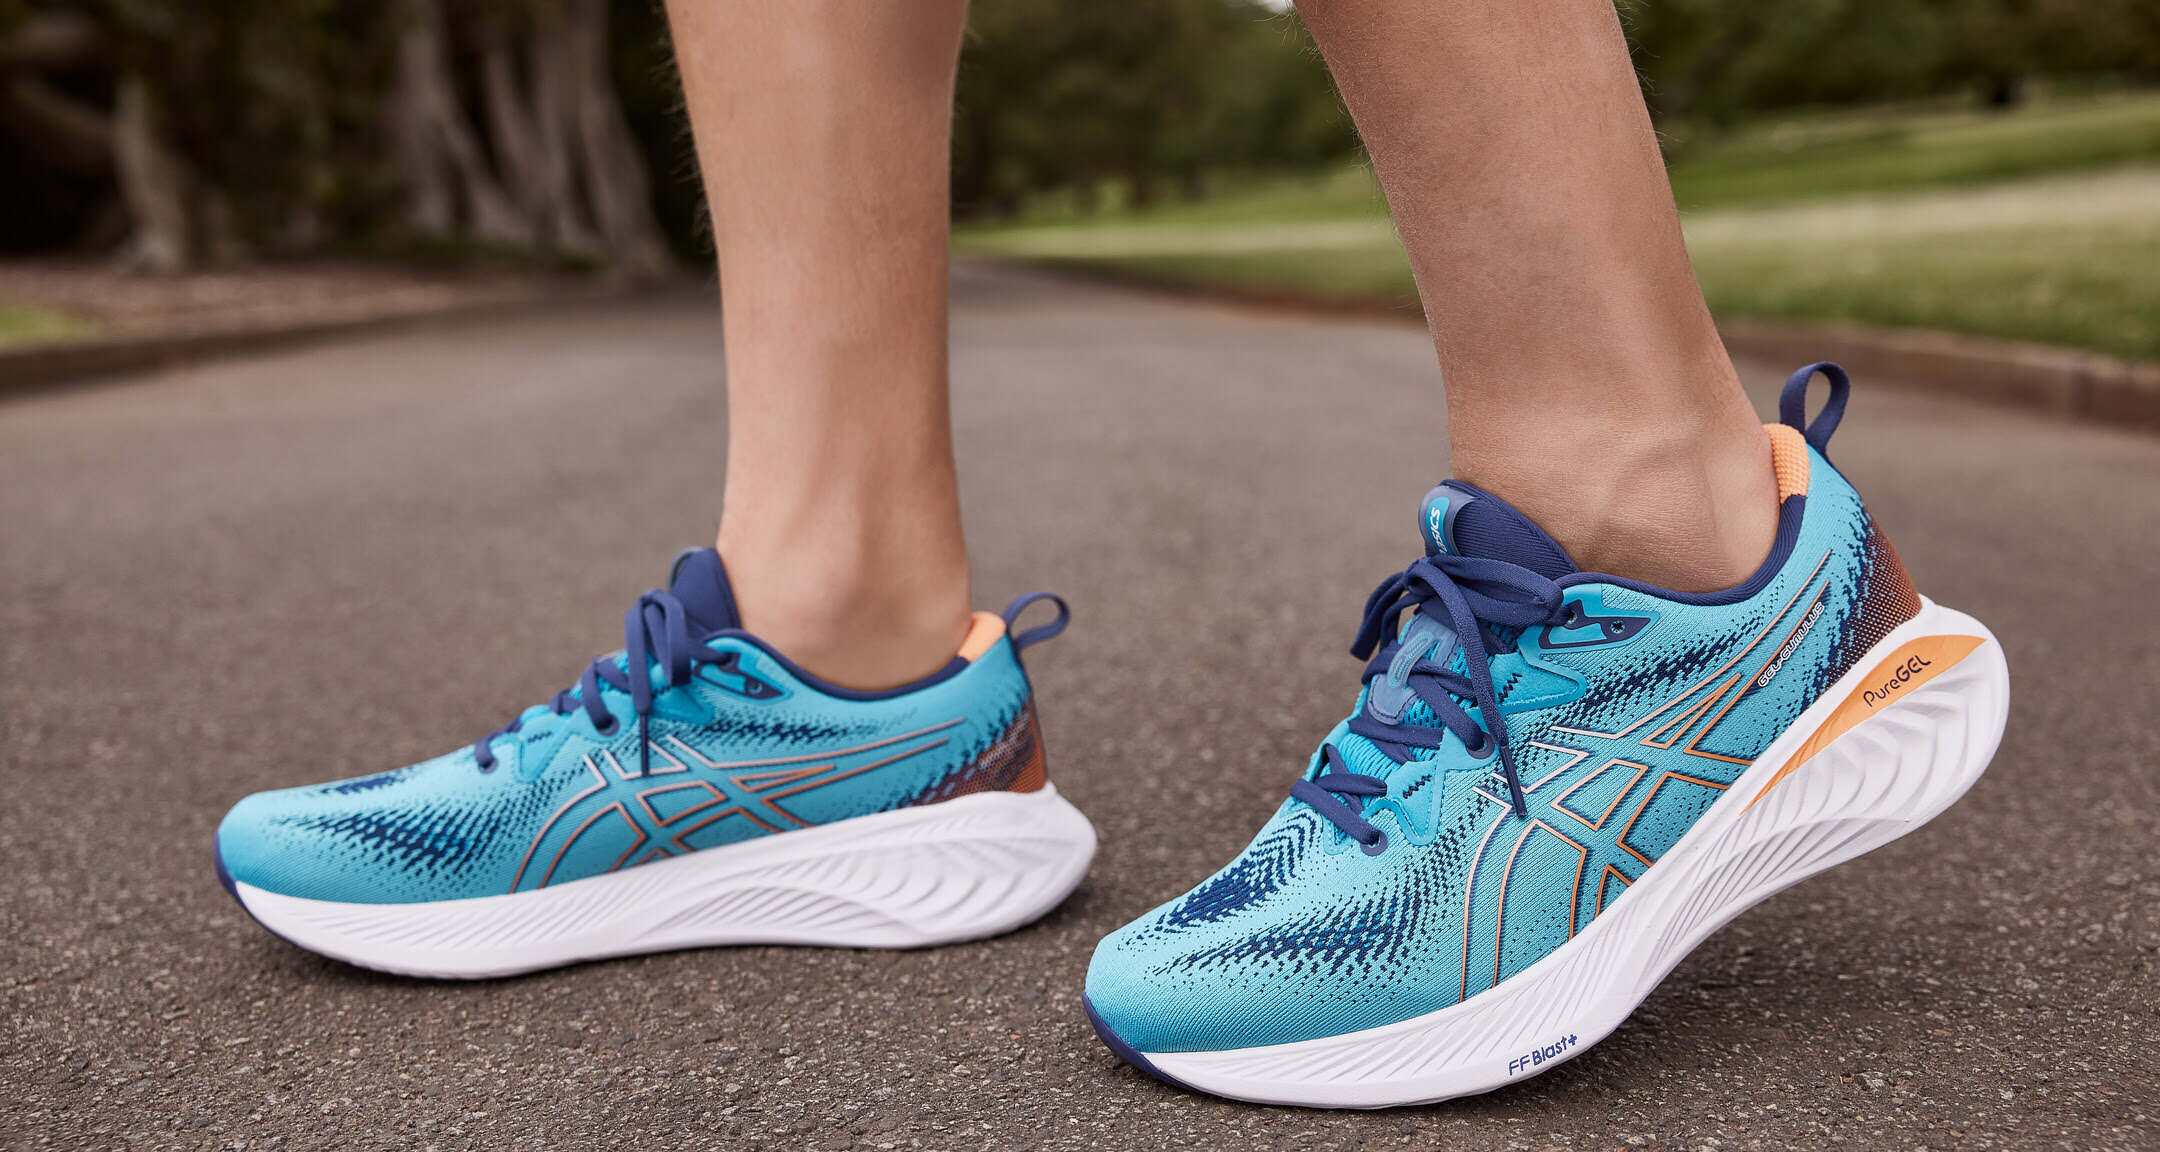 Best Saucony Running Shoes 2022 - Top Picks for Men and Women